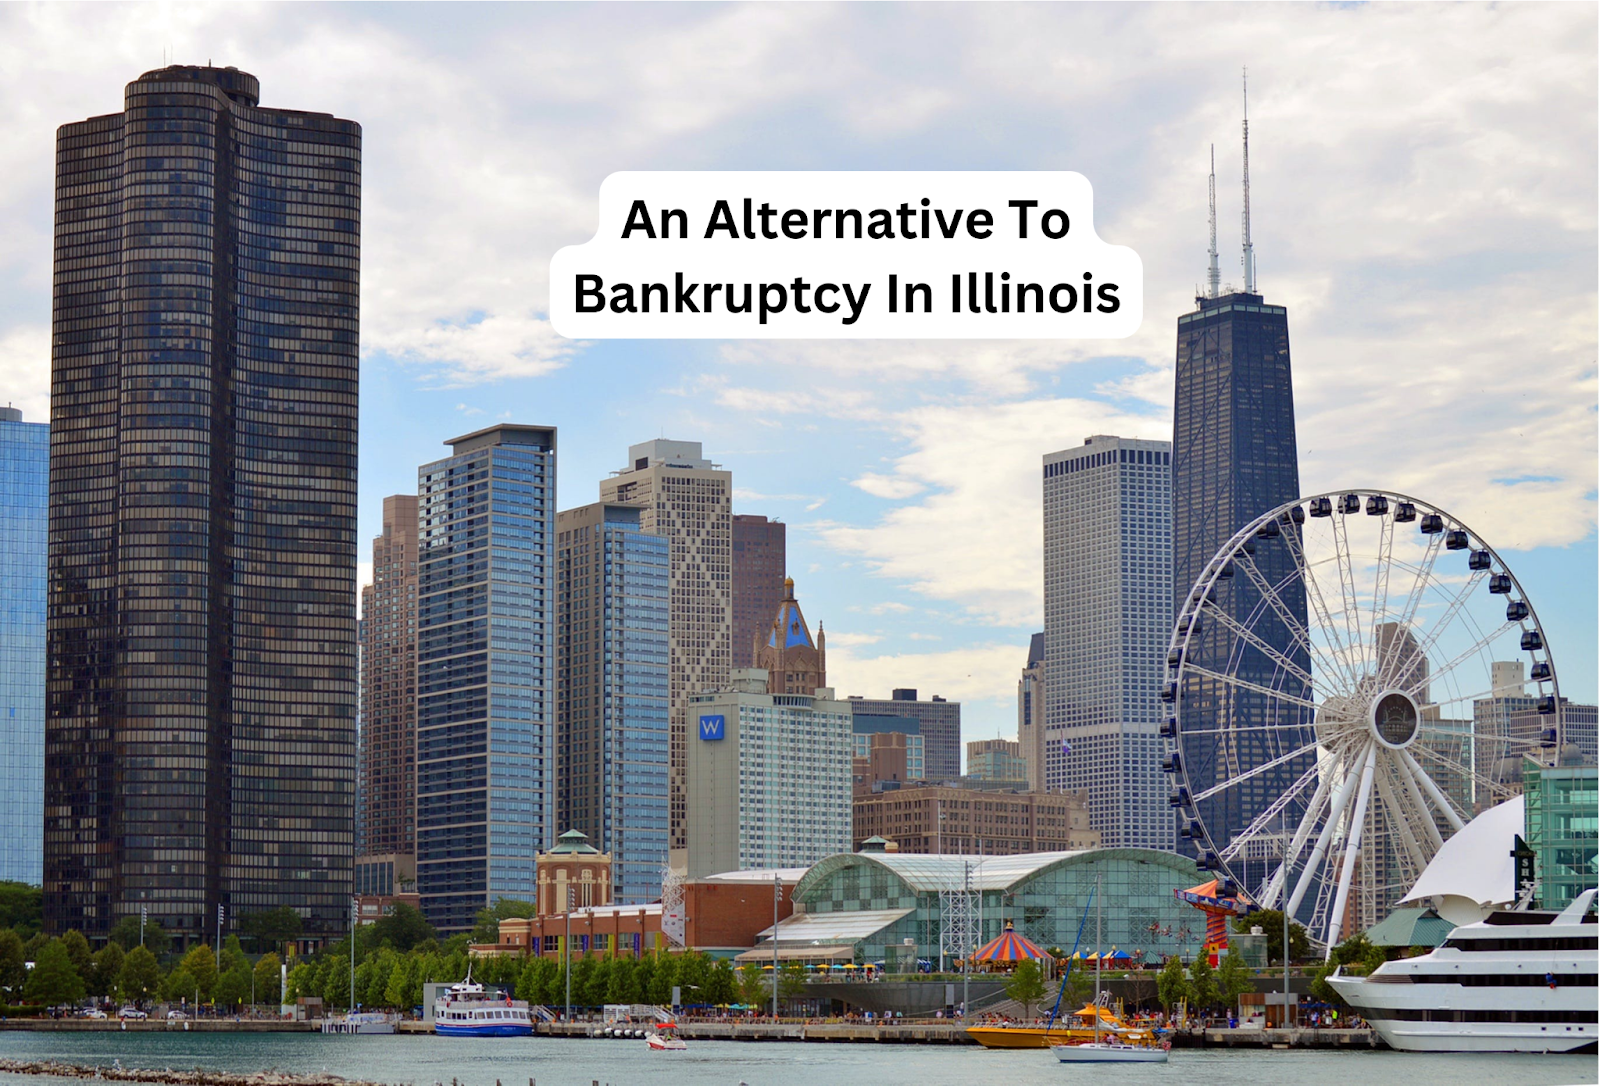 An Alternative To Bankruptcy In Illinois